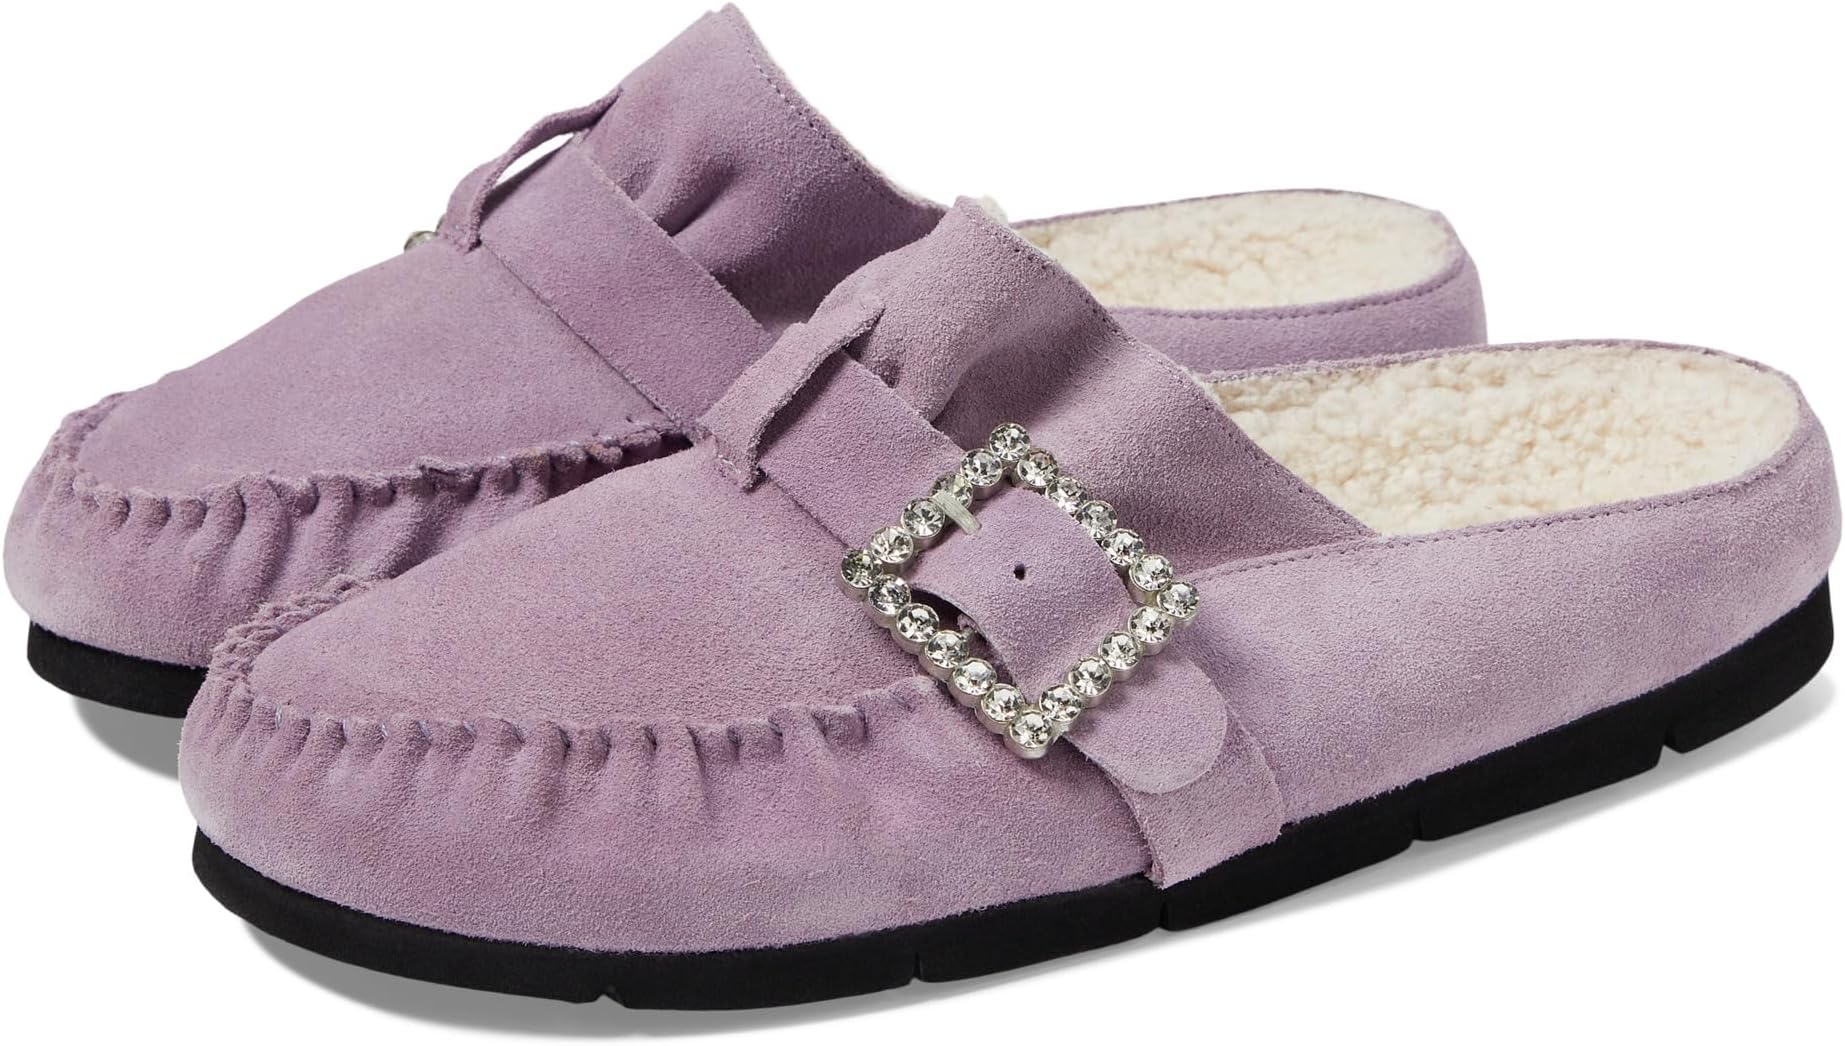 Сабо Shearling After Riding Mule Free People, цвет Lavender Suede